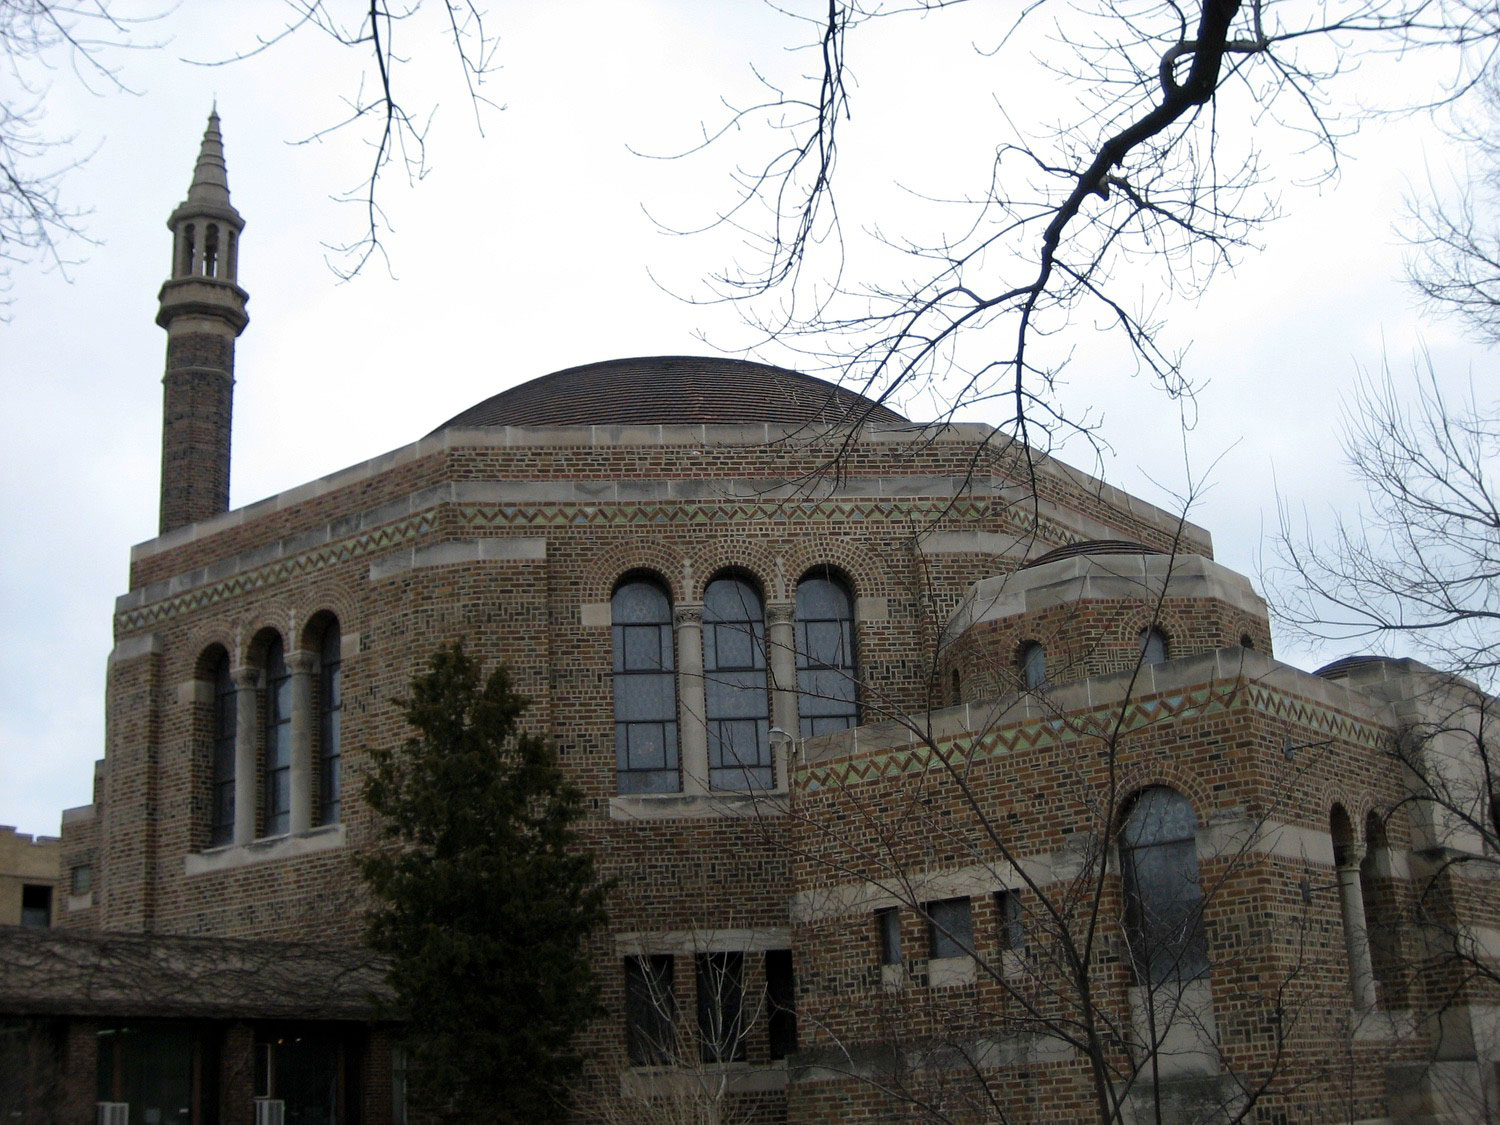 KAM Isaiah Israel Synagogue - View from S. Greenwood upward toward the main dome and smaller dome to the north (left) of the main entrance